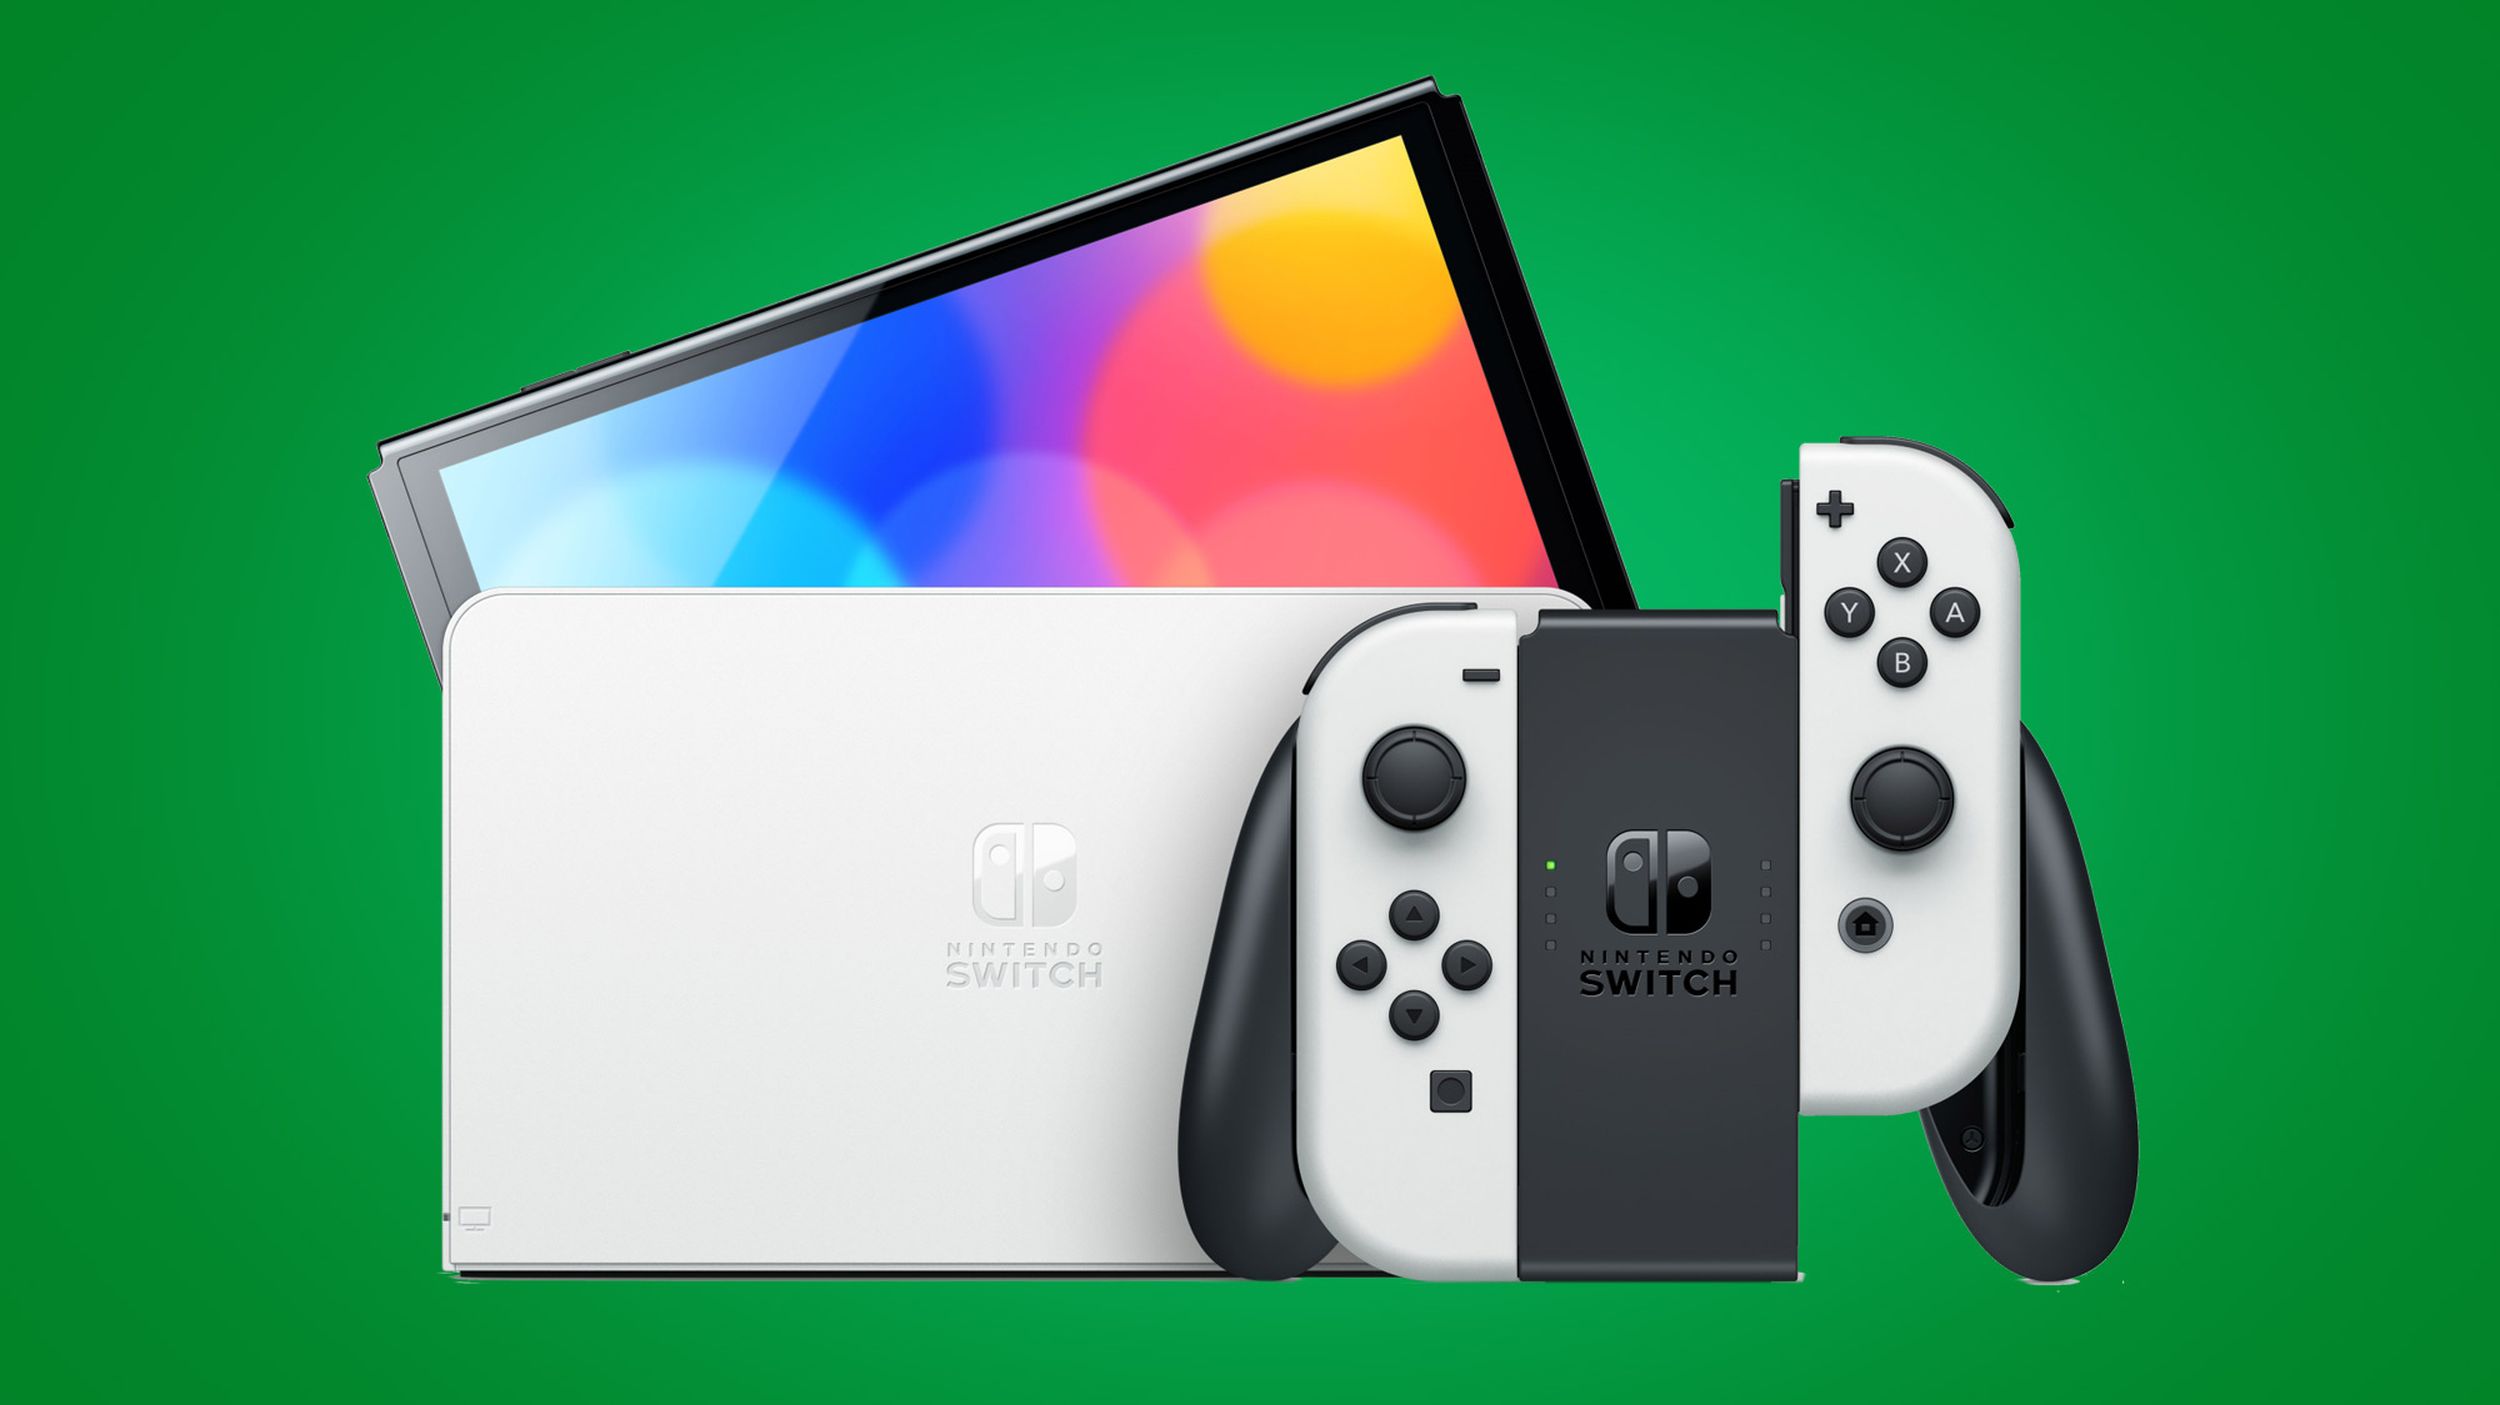 Game On: Is Nintendo Switch OLED a worthwhile mid-generation 